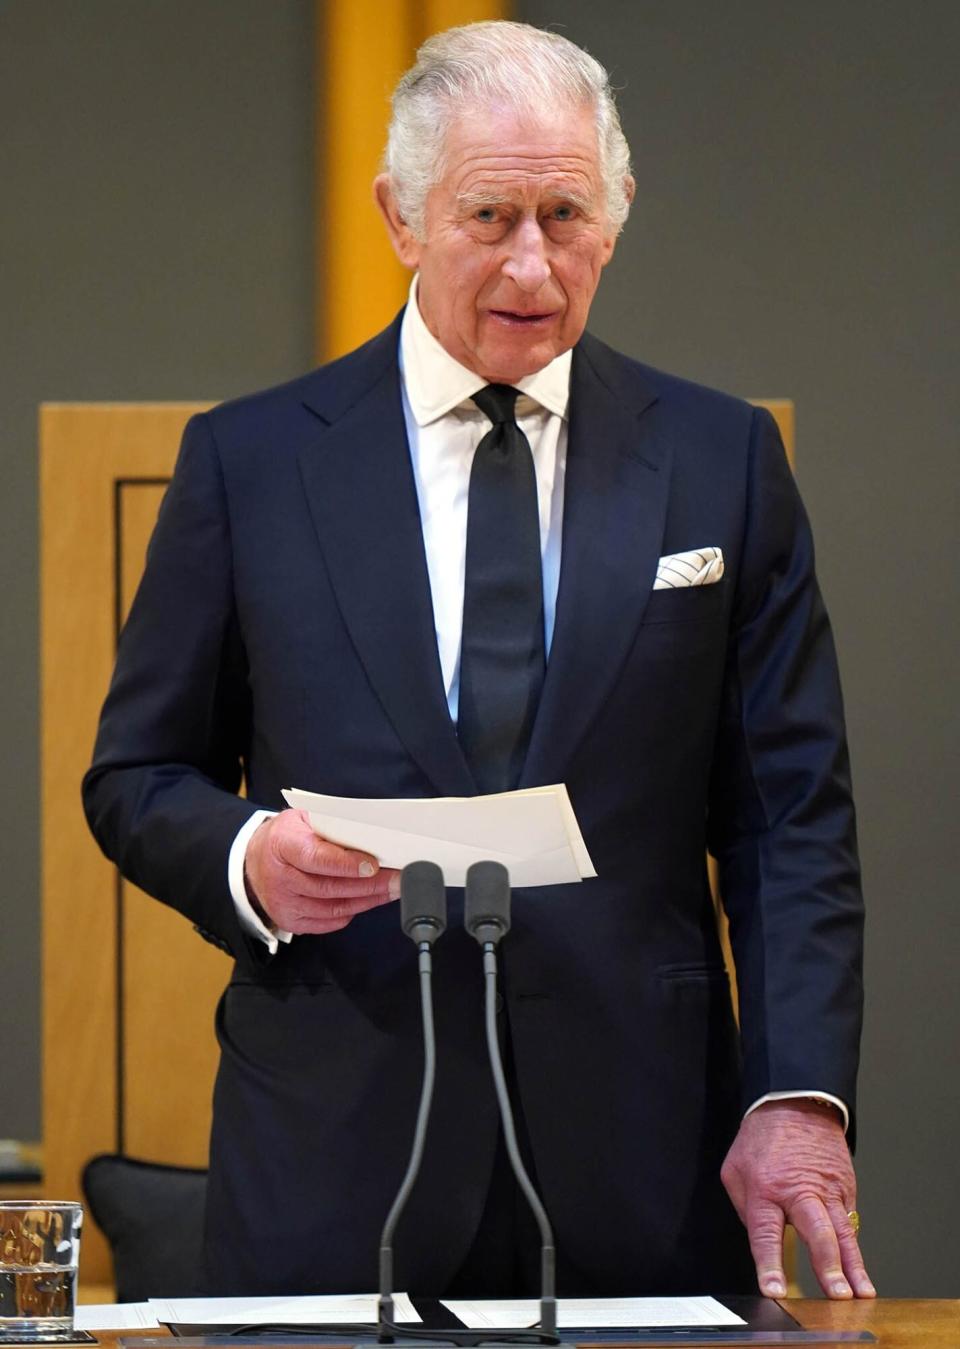 King Charles III speaks after receiving a Motion of Condolence at the Senedd, following the death of Queen Elizabeth II